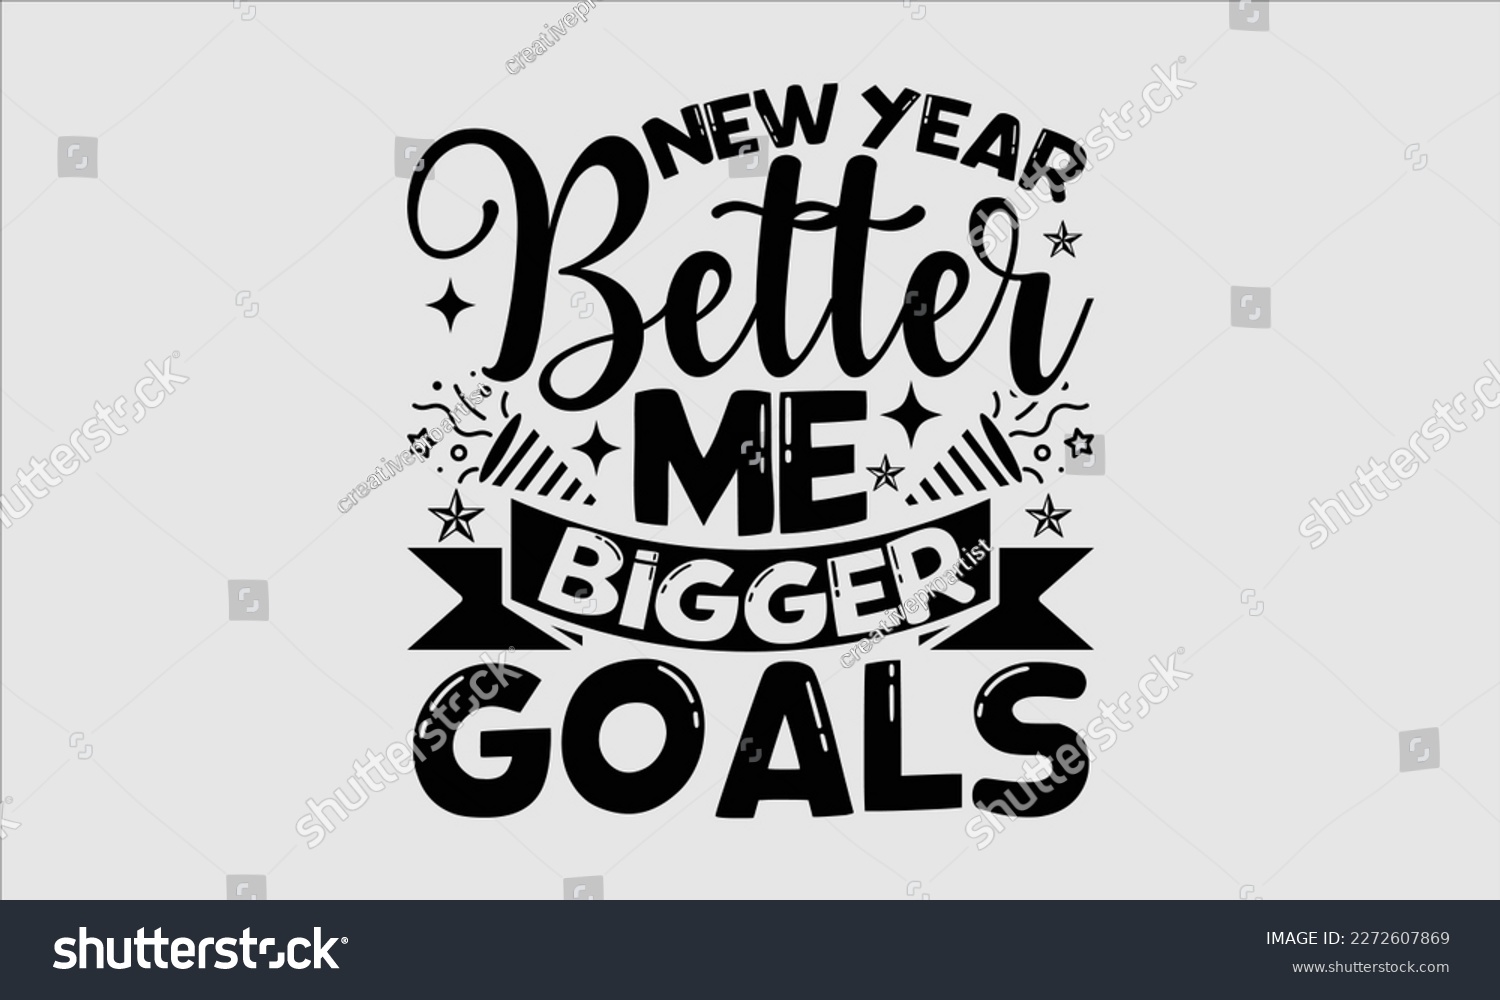 SVG of New year better me bigger goals- Happy New Year t shirt Design, Handmade calligraphy vector illustration, stationary for prints on svg and bags, posters svg